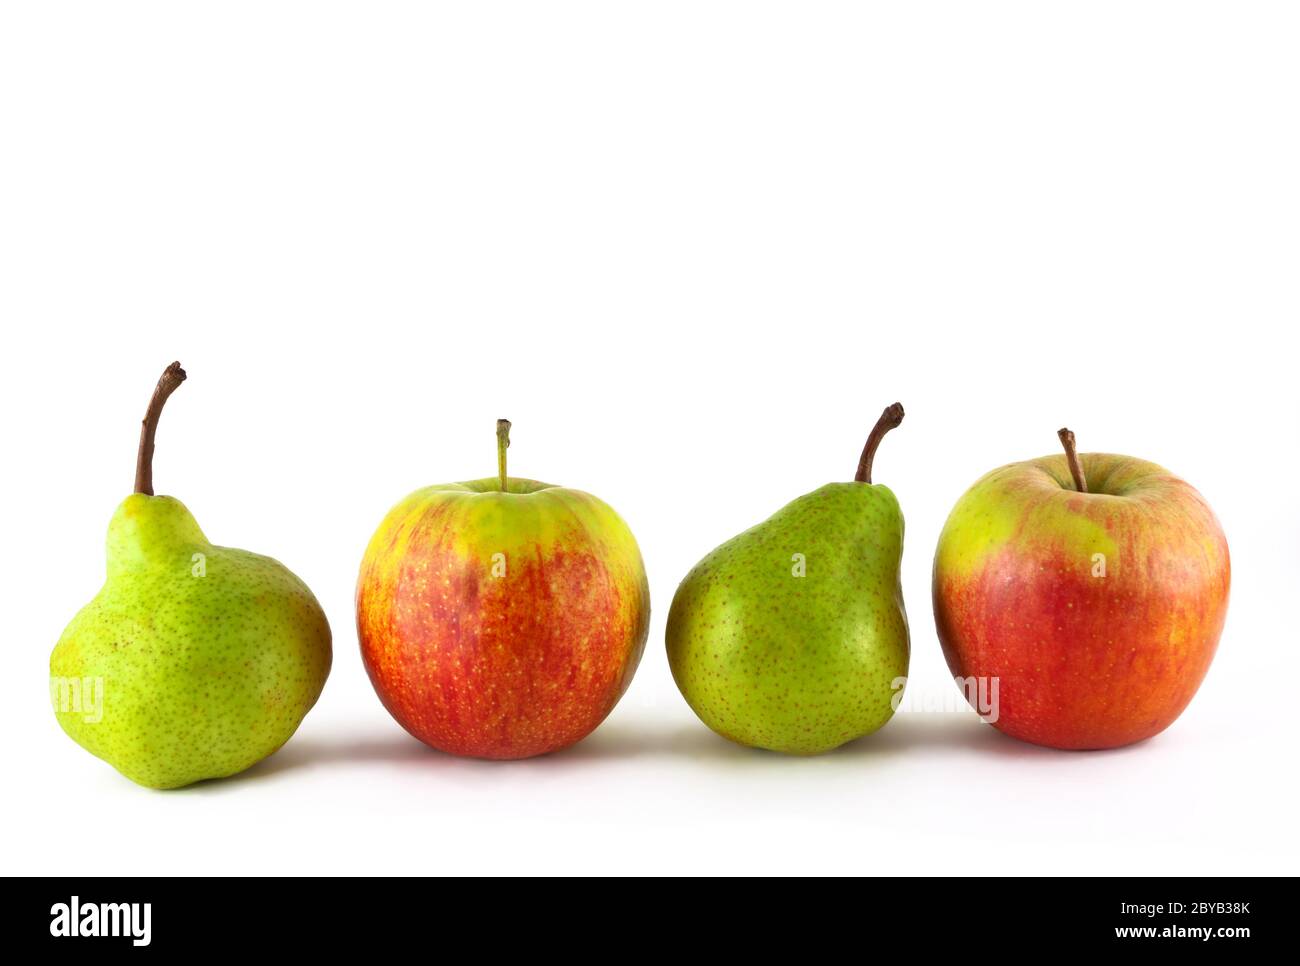 Fresh apples and pears Stock Photo